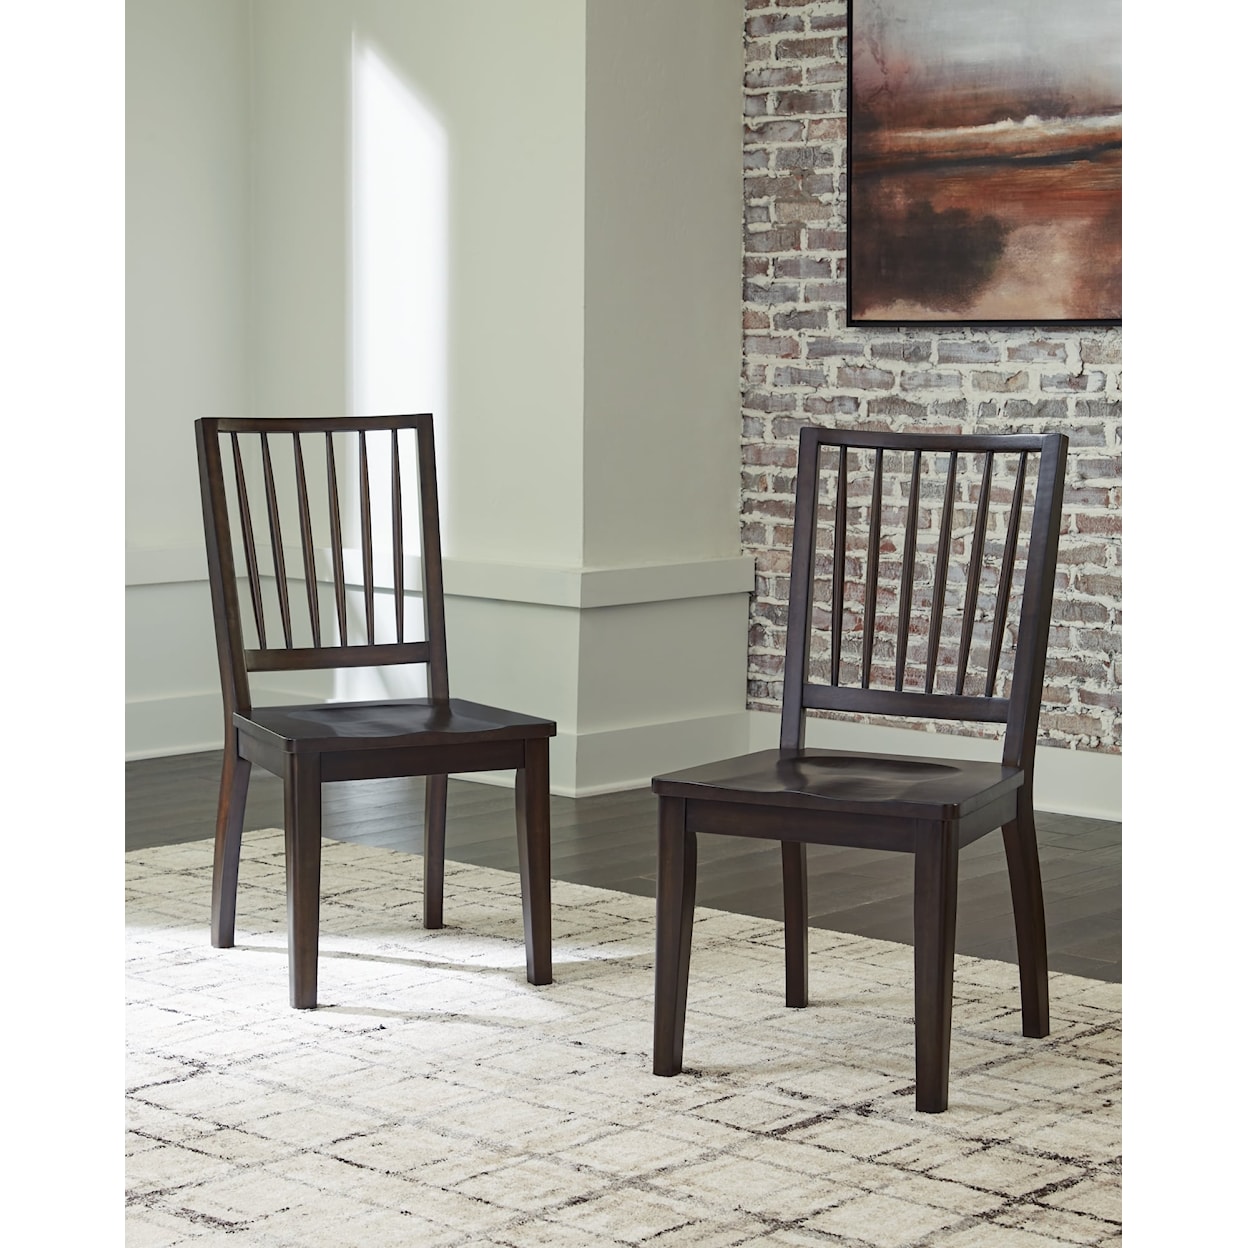 Benchcraft Charterton Dining Room Side Chair